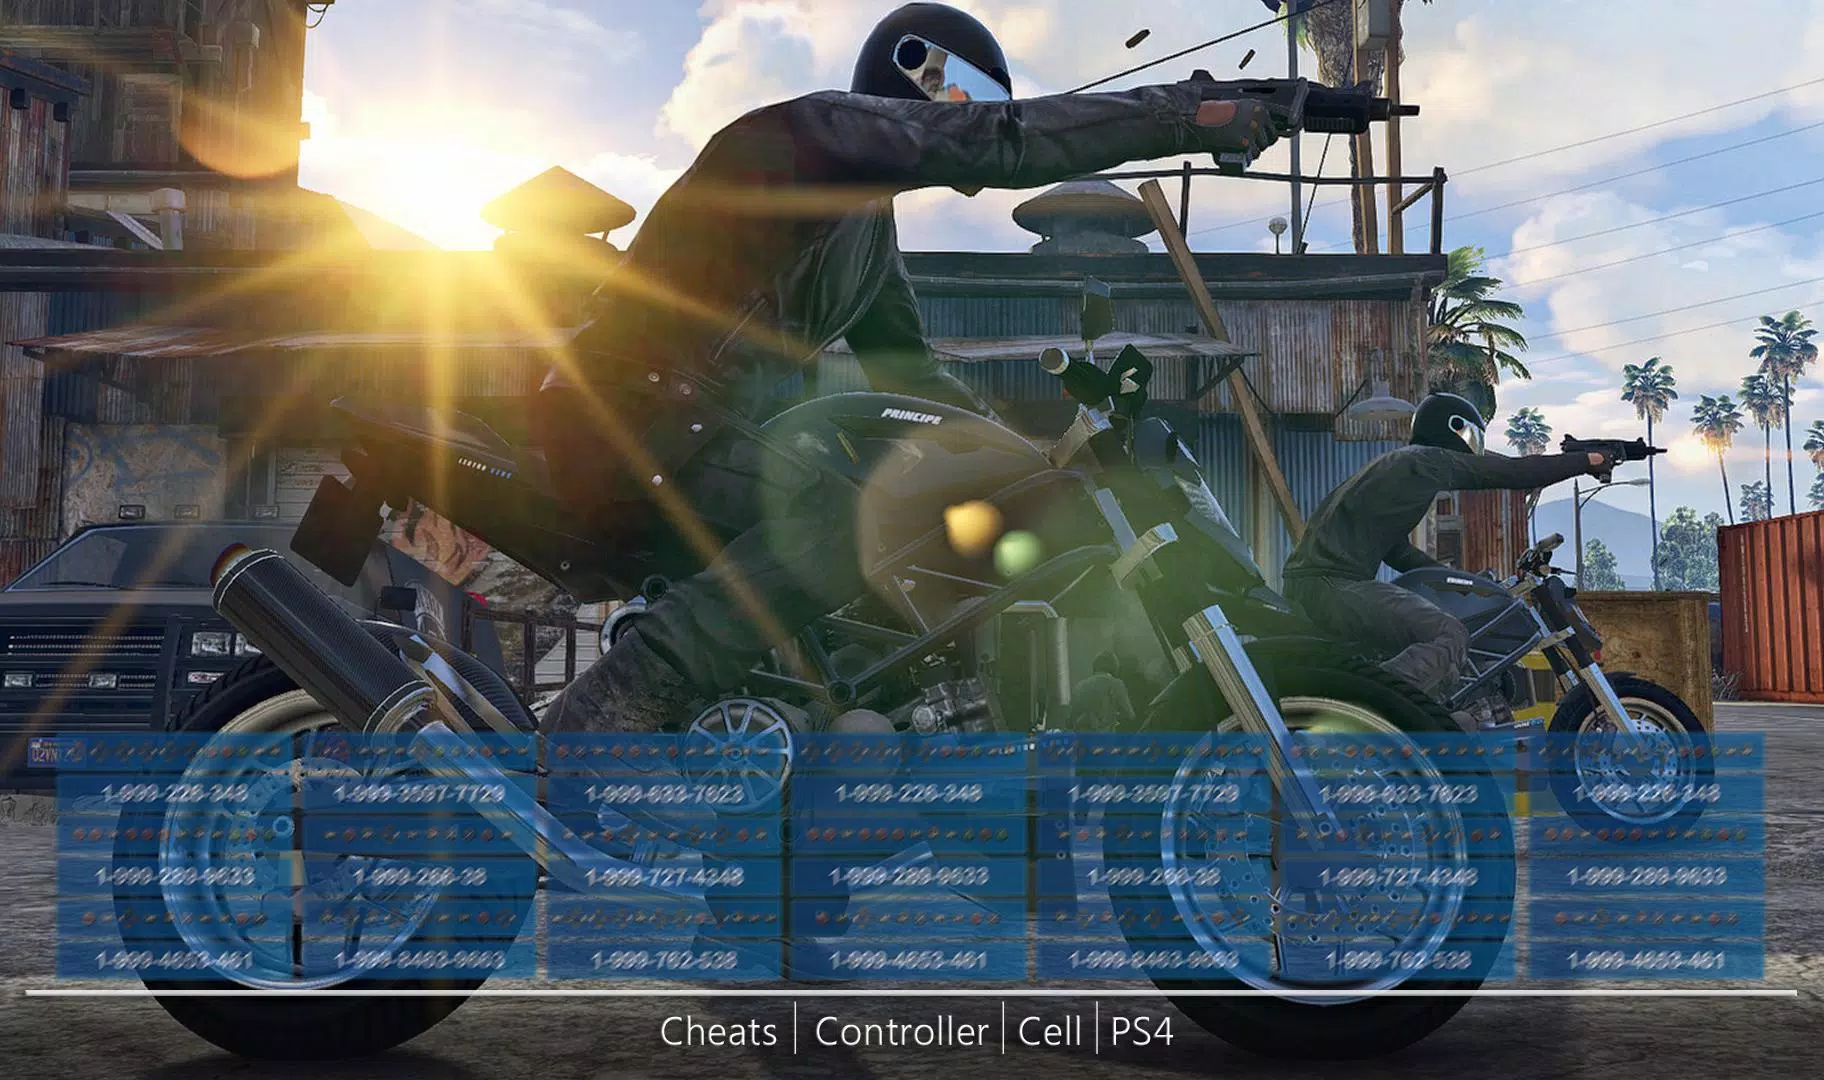 Cheat gta 5 cheats ps4 codes for Android - APK Download